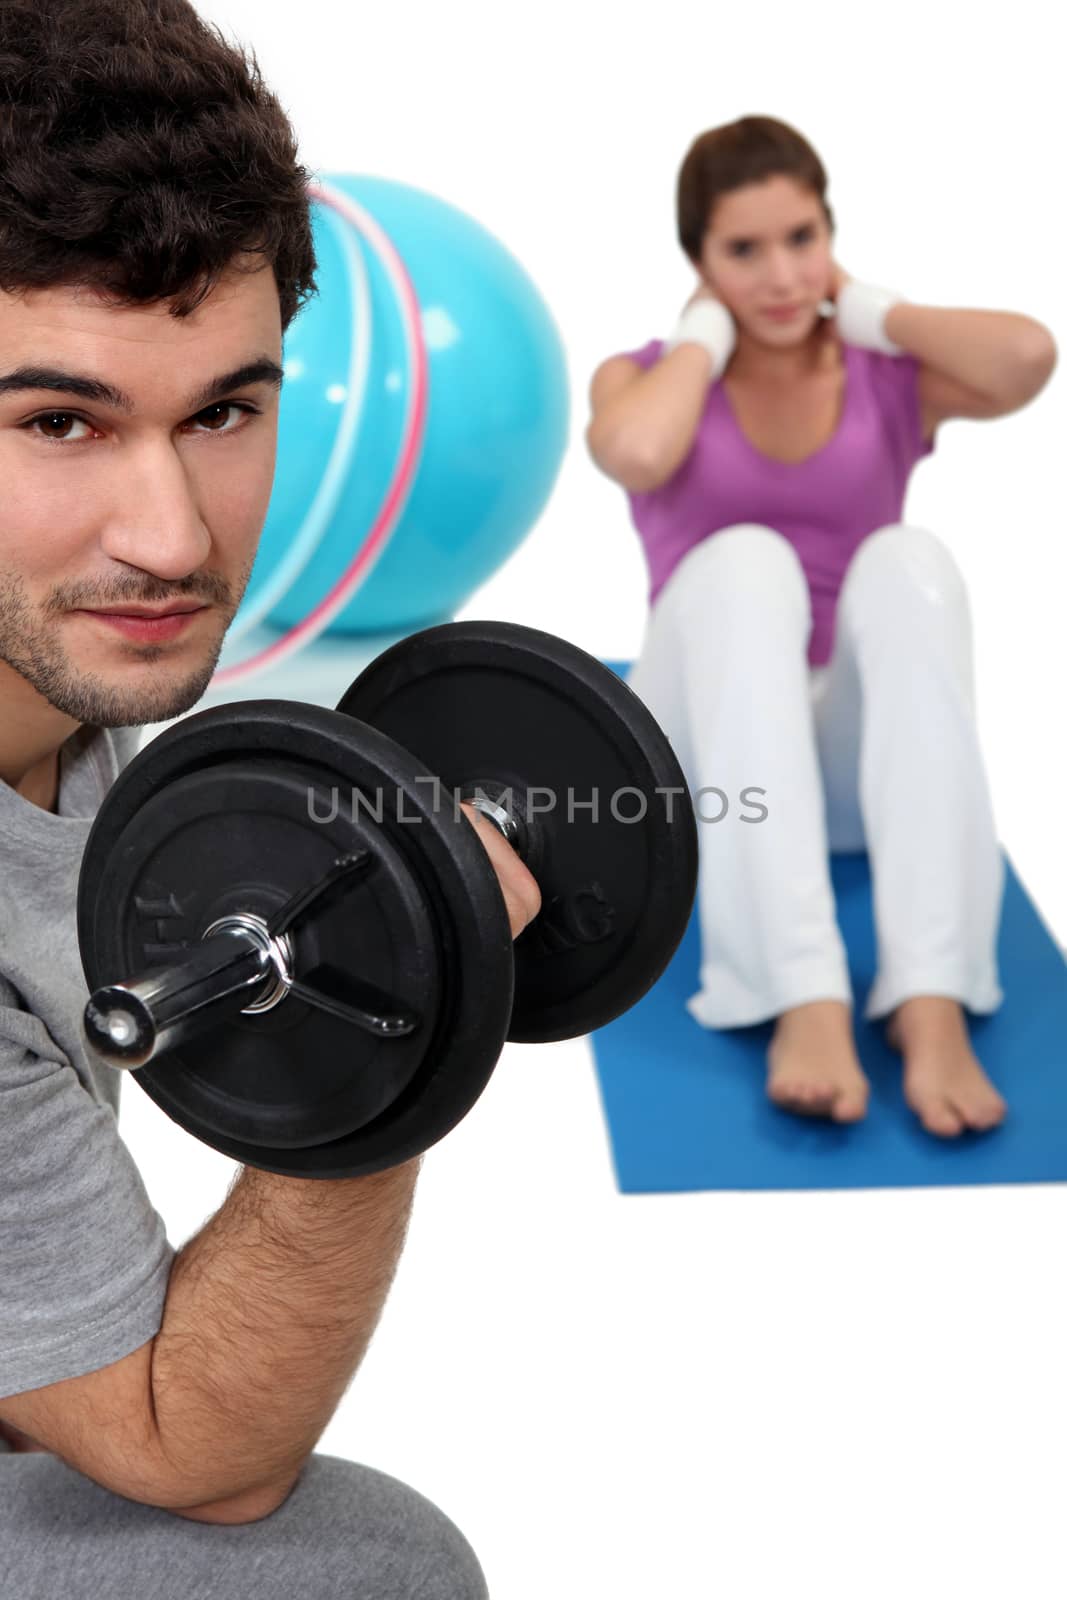 Couple working out